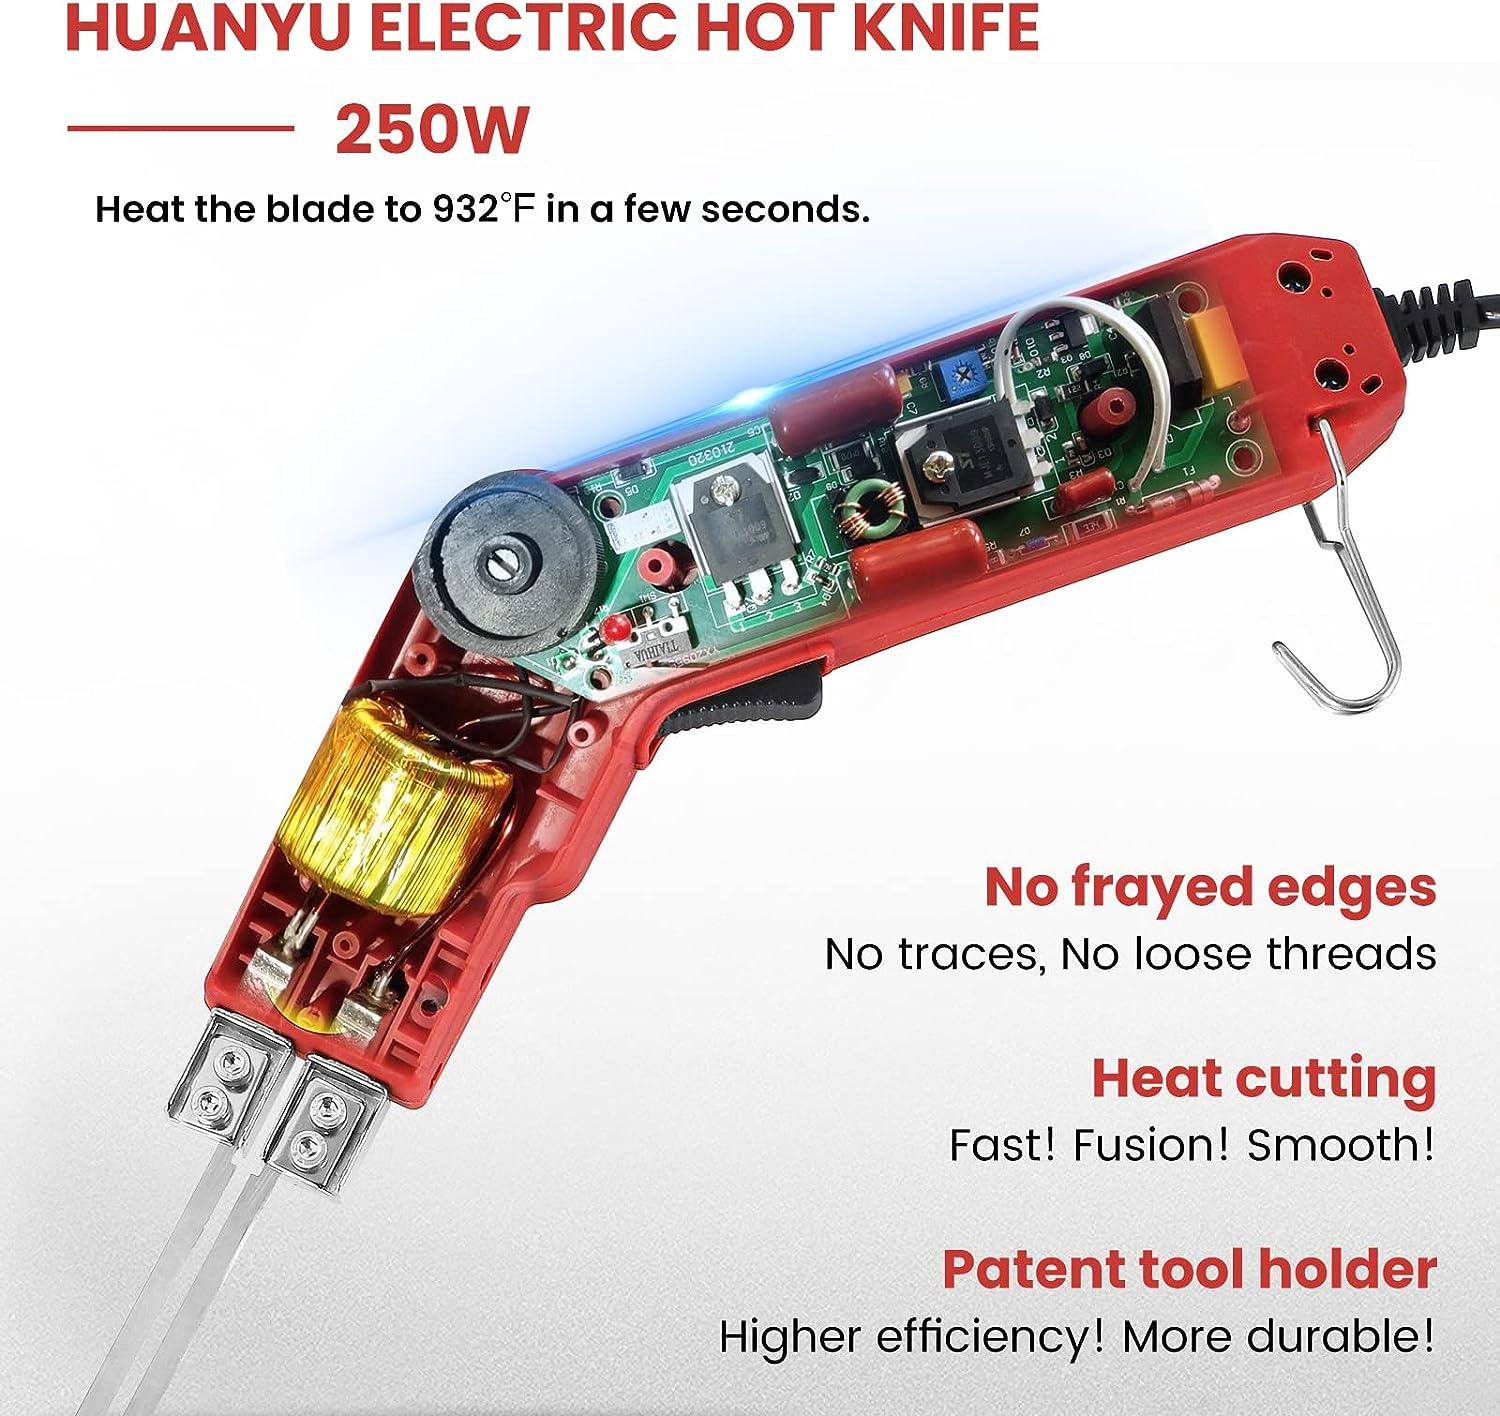  Huanyu Hot Cutter Knife 250W 10in Straight Knife,  Foam/Styrofoam Cutting Tool up to 932℉ Continuous Working, for Foam  Carving/Sponge/Rope/DIY Sculpture : Arts, Crafts & Sewing